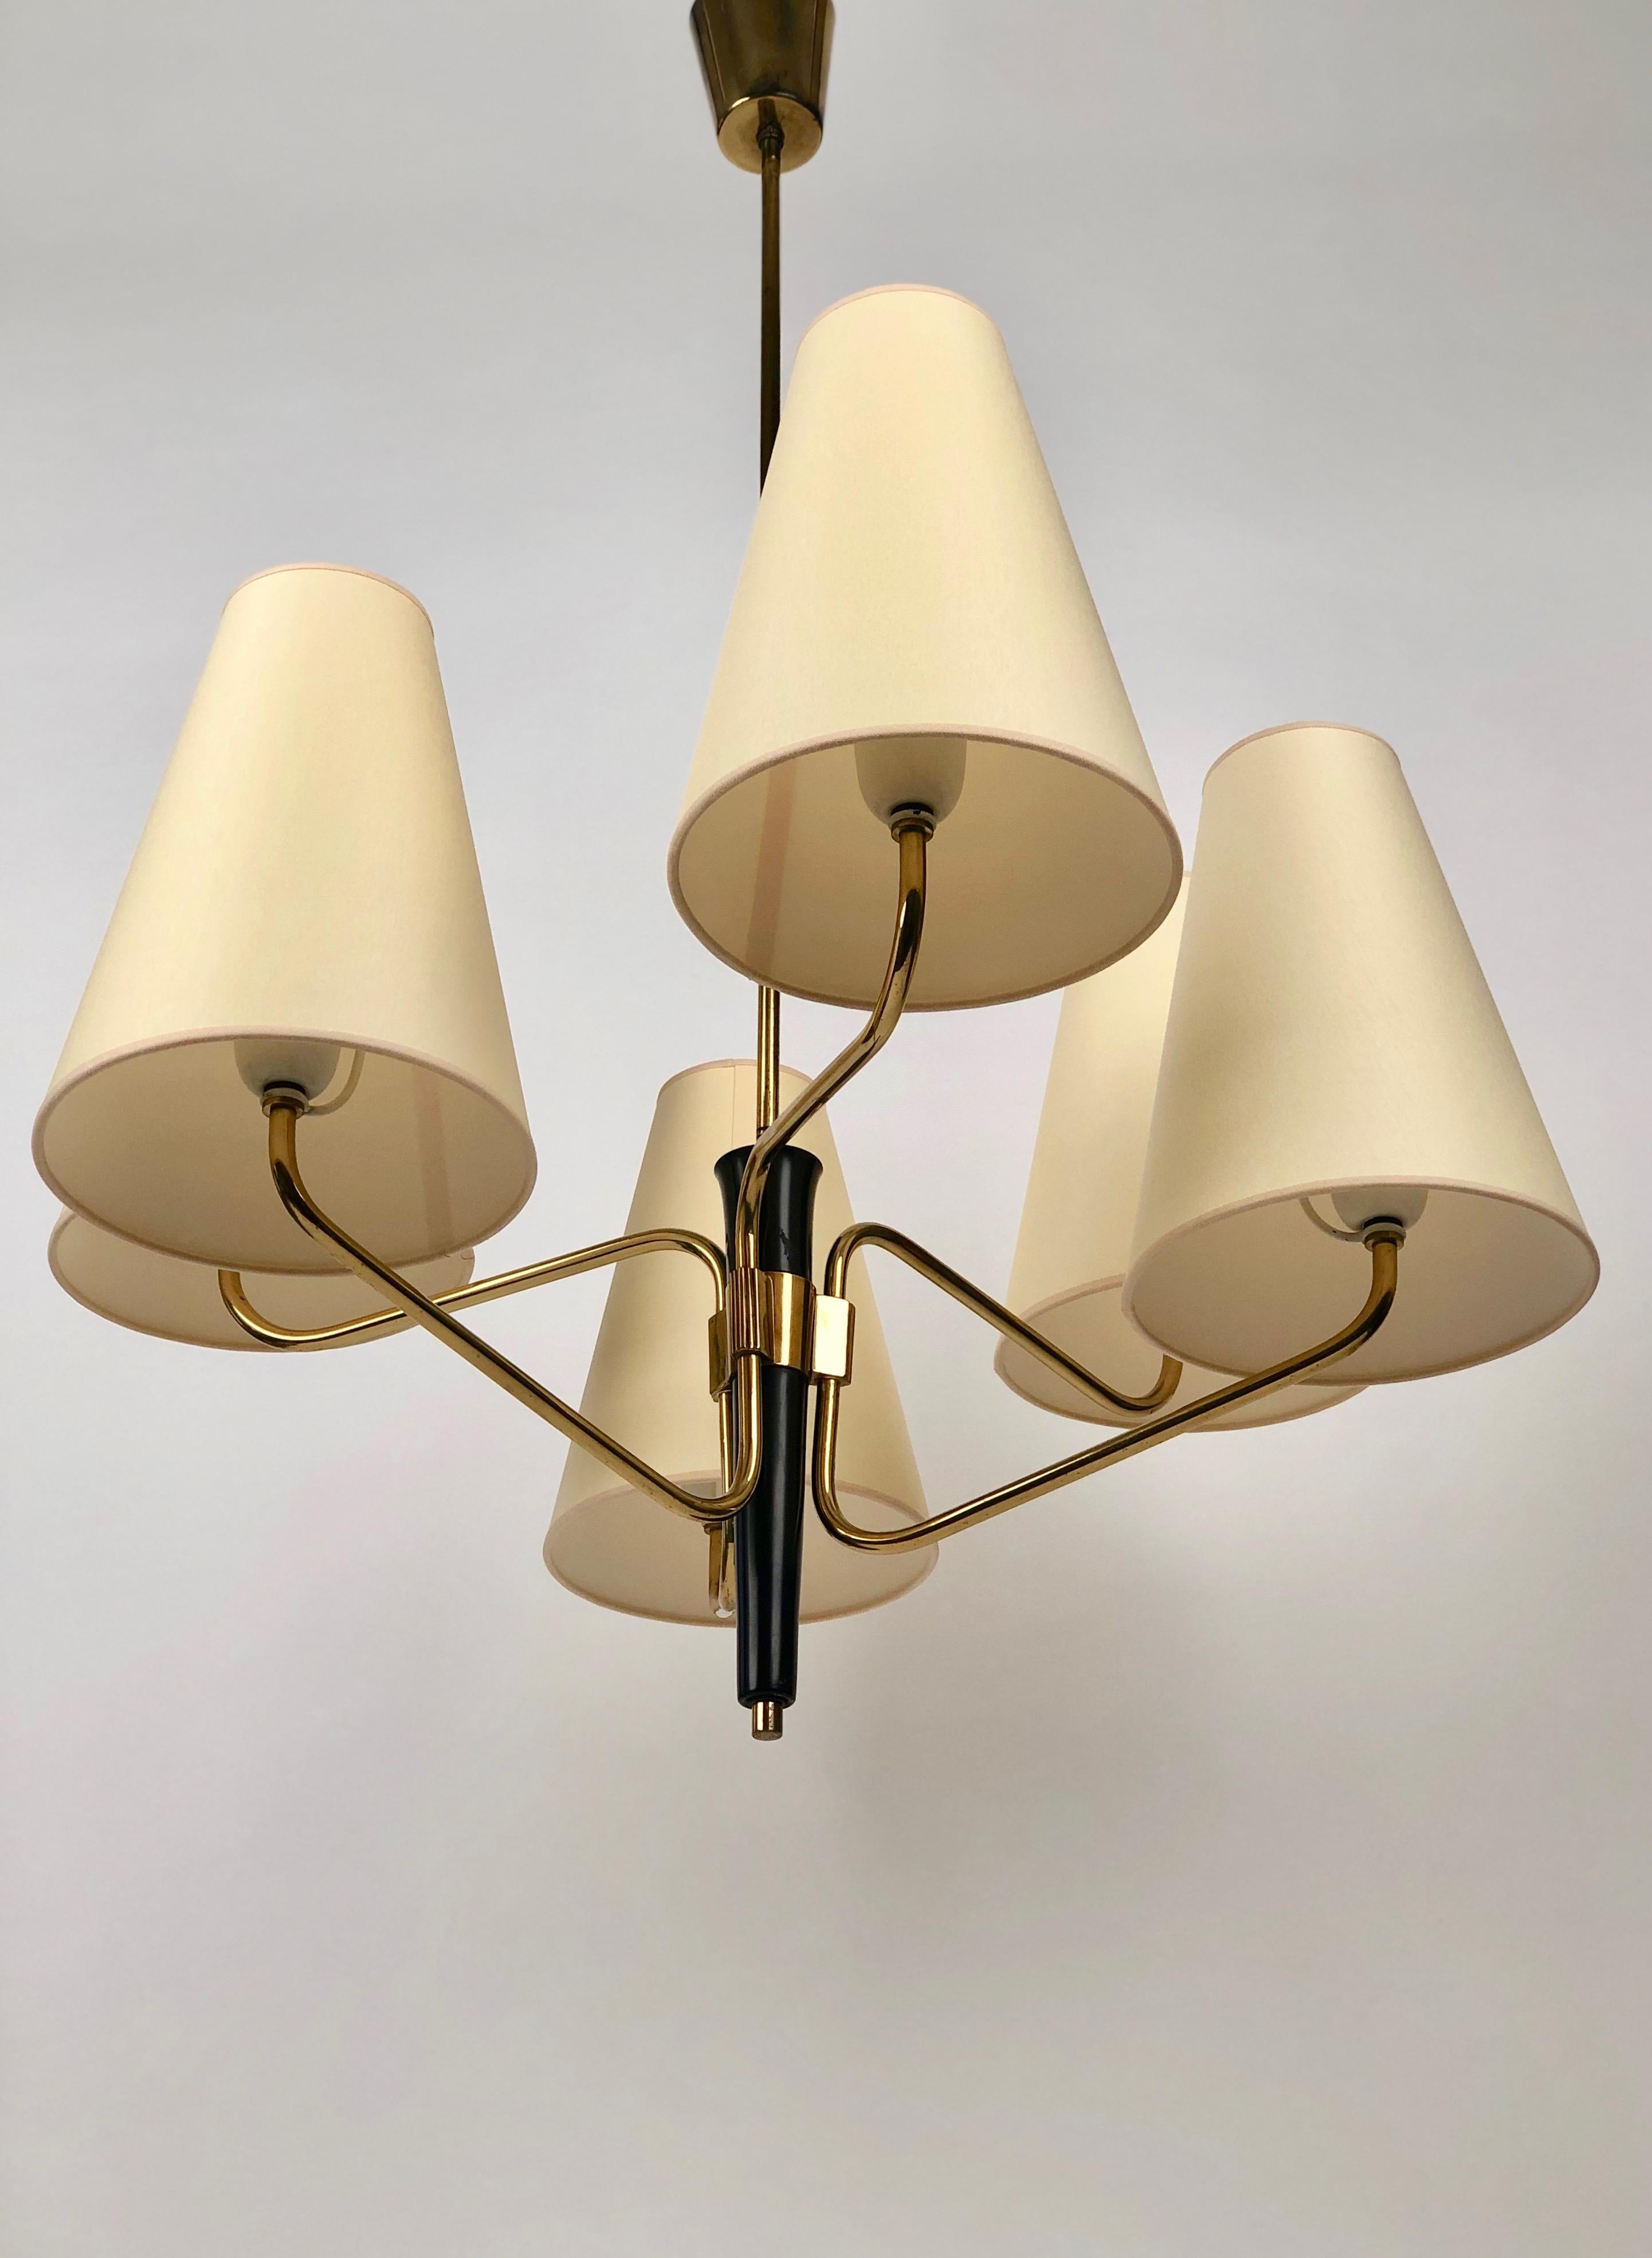 Blackened Midcentury Pendant Lamp in Brass from Rupert Nikoll, Austria with 6 Silk Shades For Sale